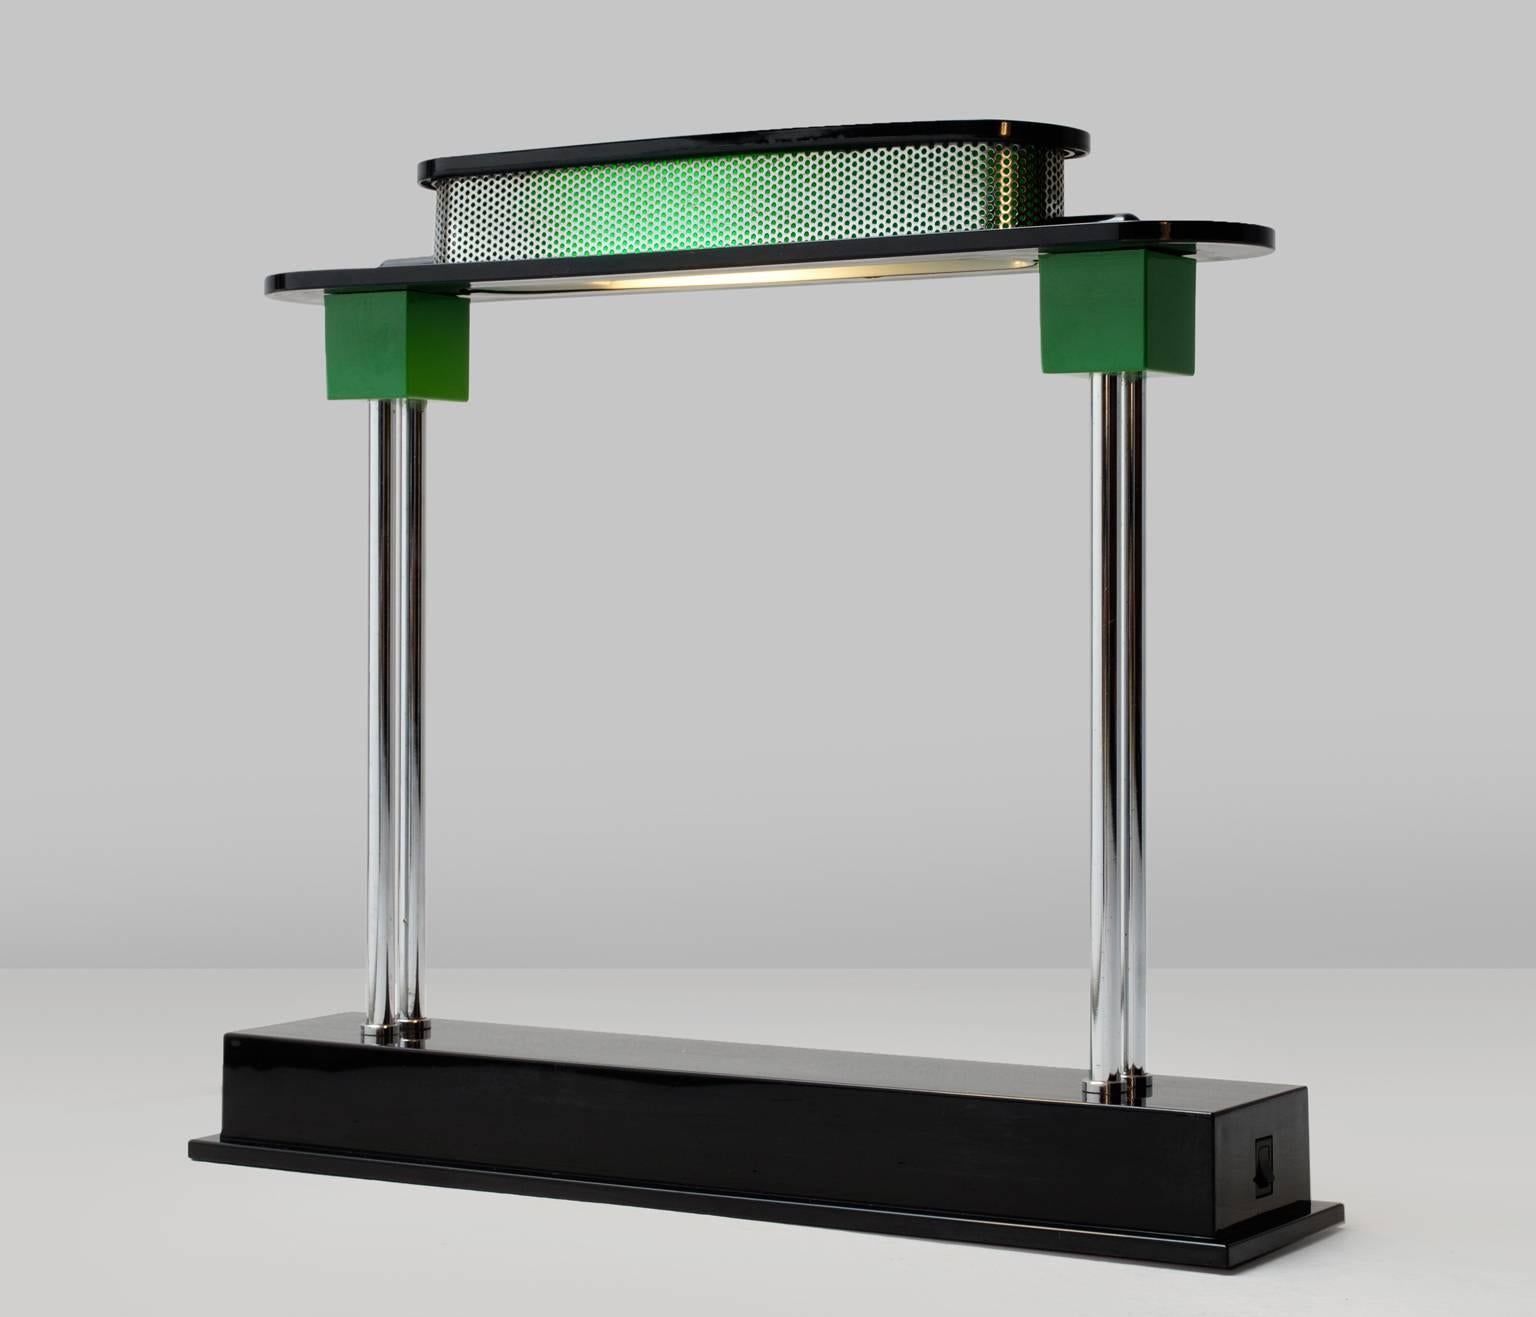 Iconic 'Pausania' desk or table lamp designed by Ettore Sottsass for Artemide, 1982 Italy.

A theatrical item, construction made of chromed tubular steel, black and green plastic. Remarkable are the influence of architecture and the unusual mix of